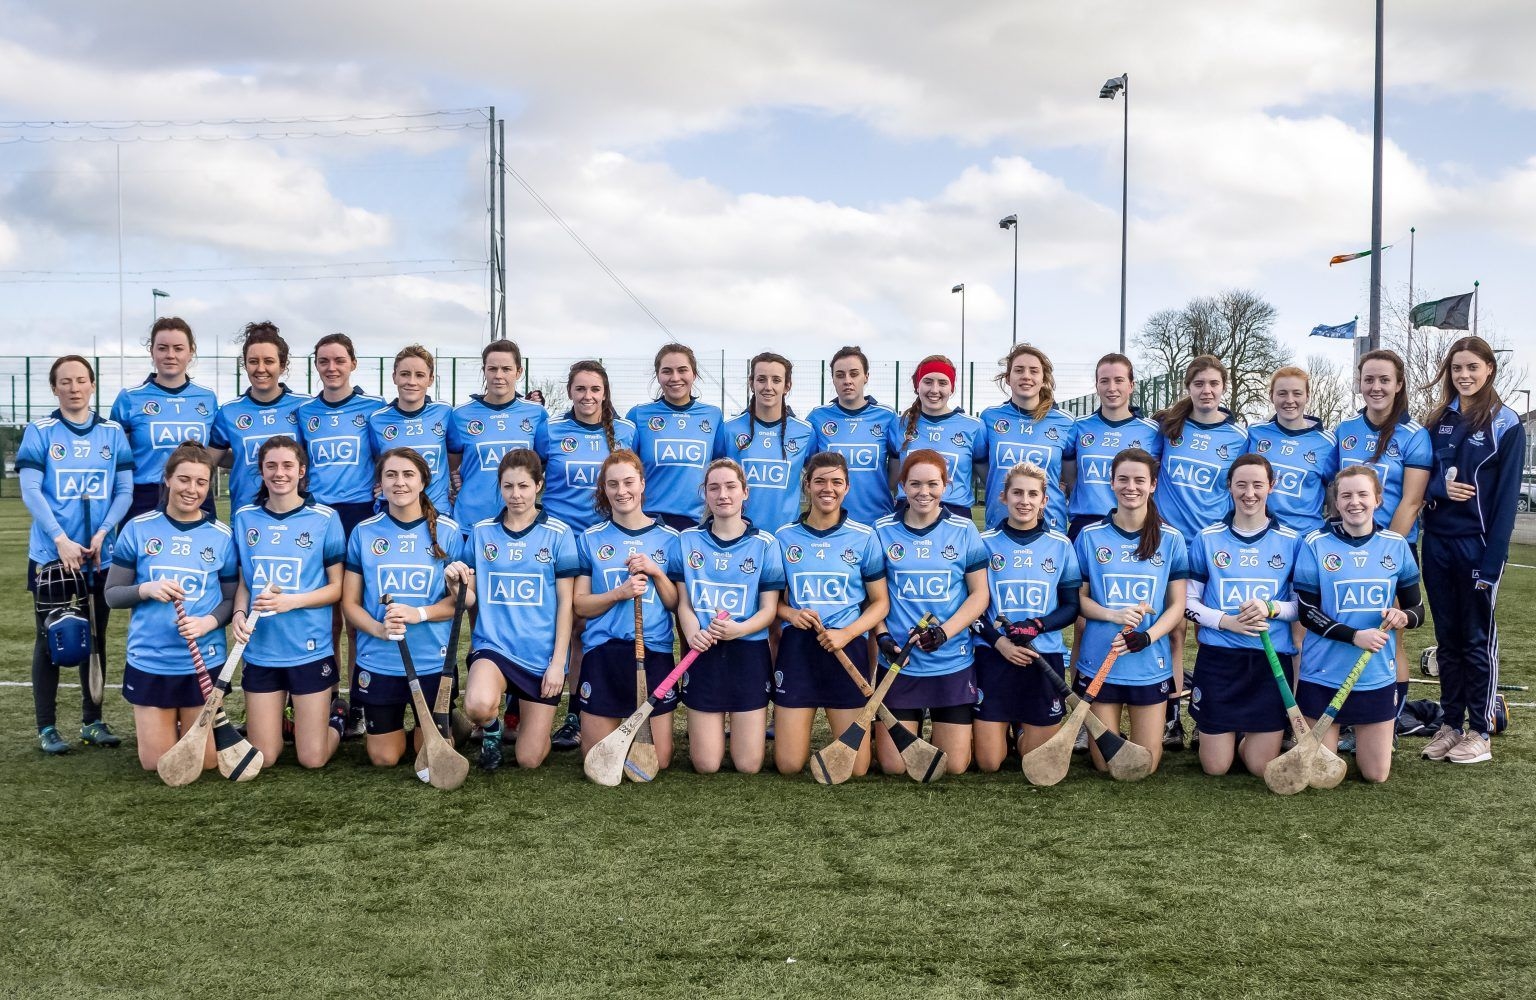 The difference between Camogie and Hurling? Hurling and camogie are firmly related sports. They share likenesses with Hurley and Sliotar.